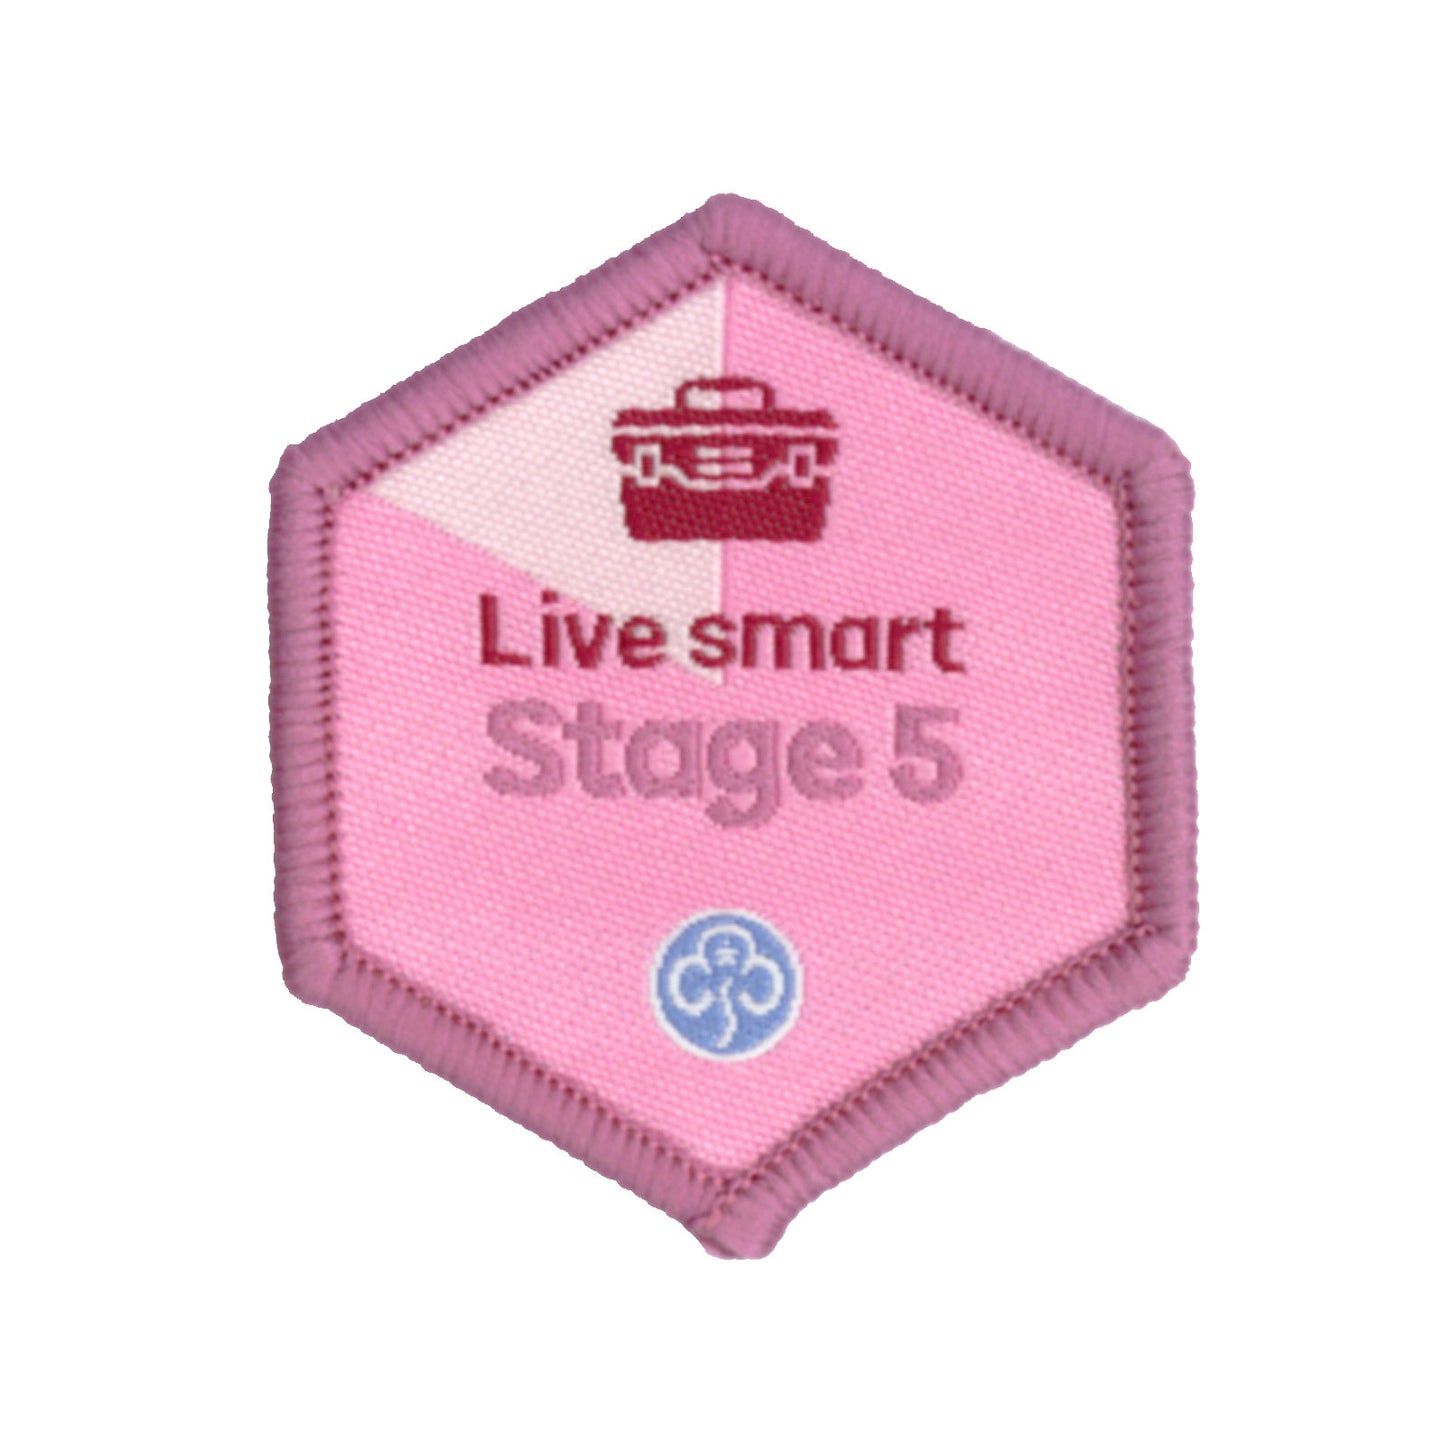 Skills Builder - Skills For My Future - Live Smart Stage 5 Woven Badge